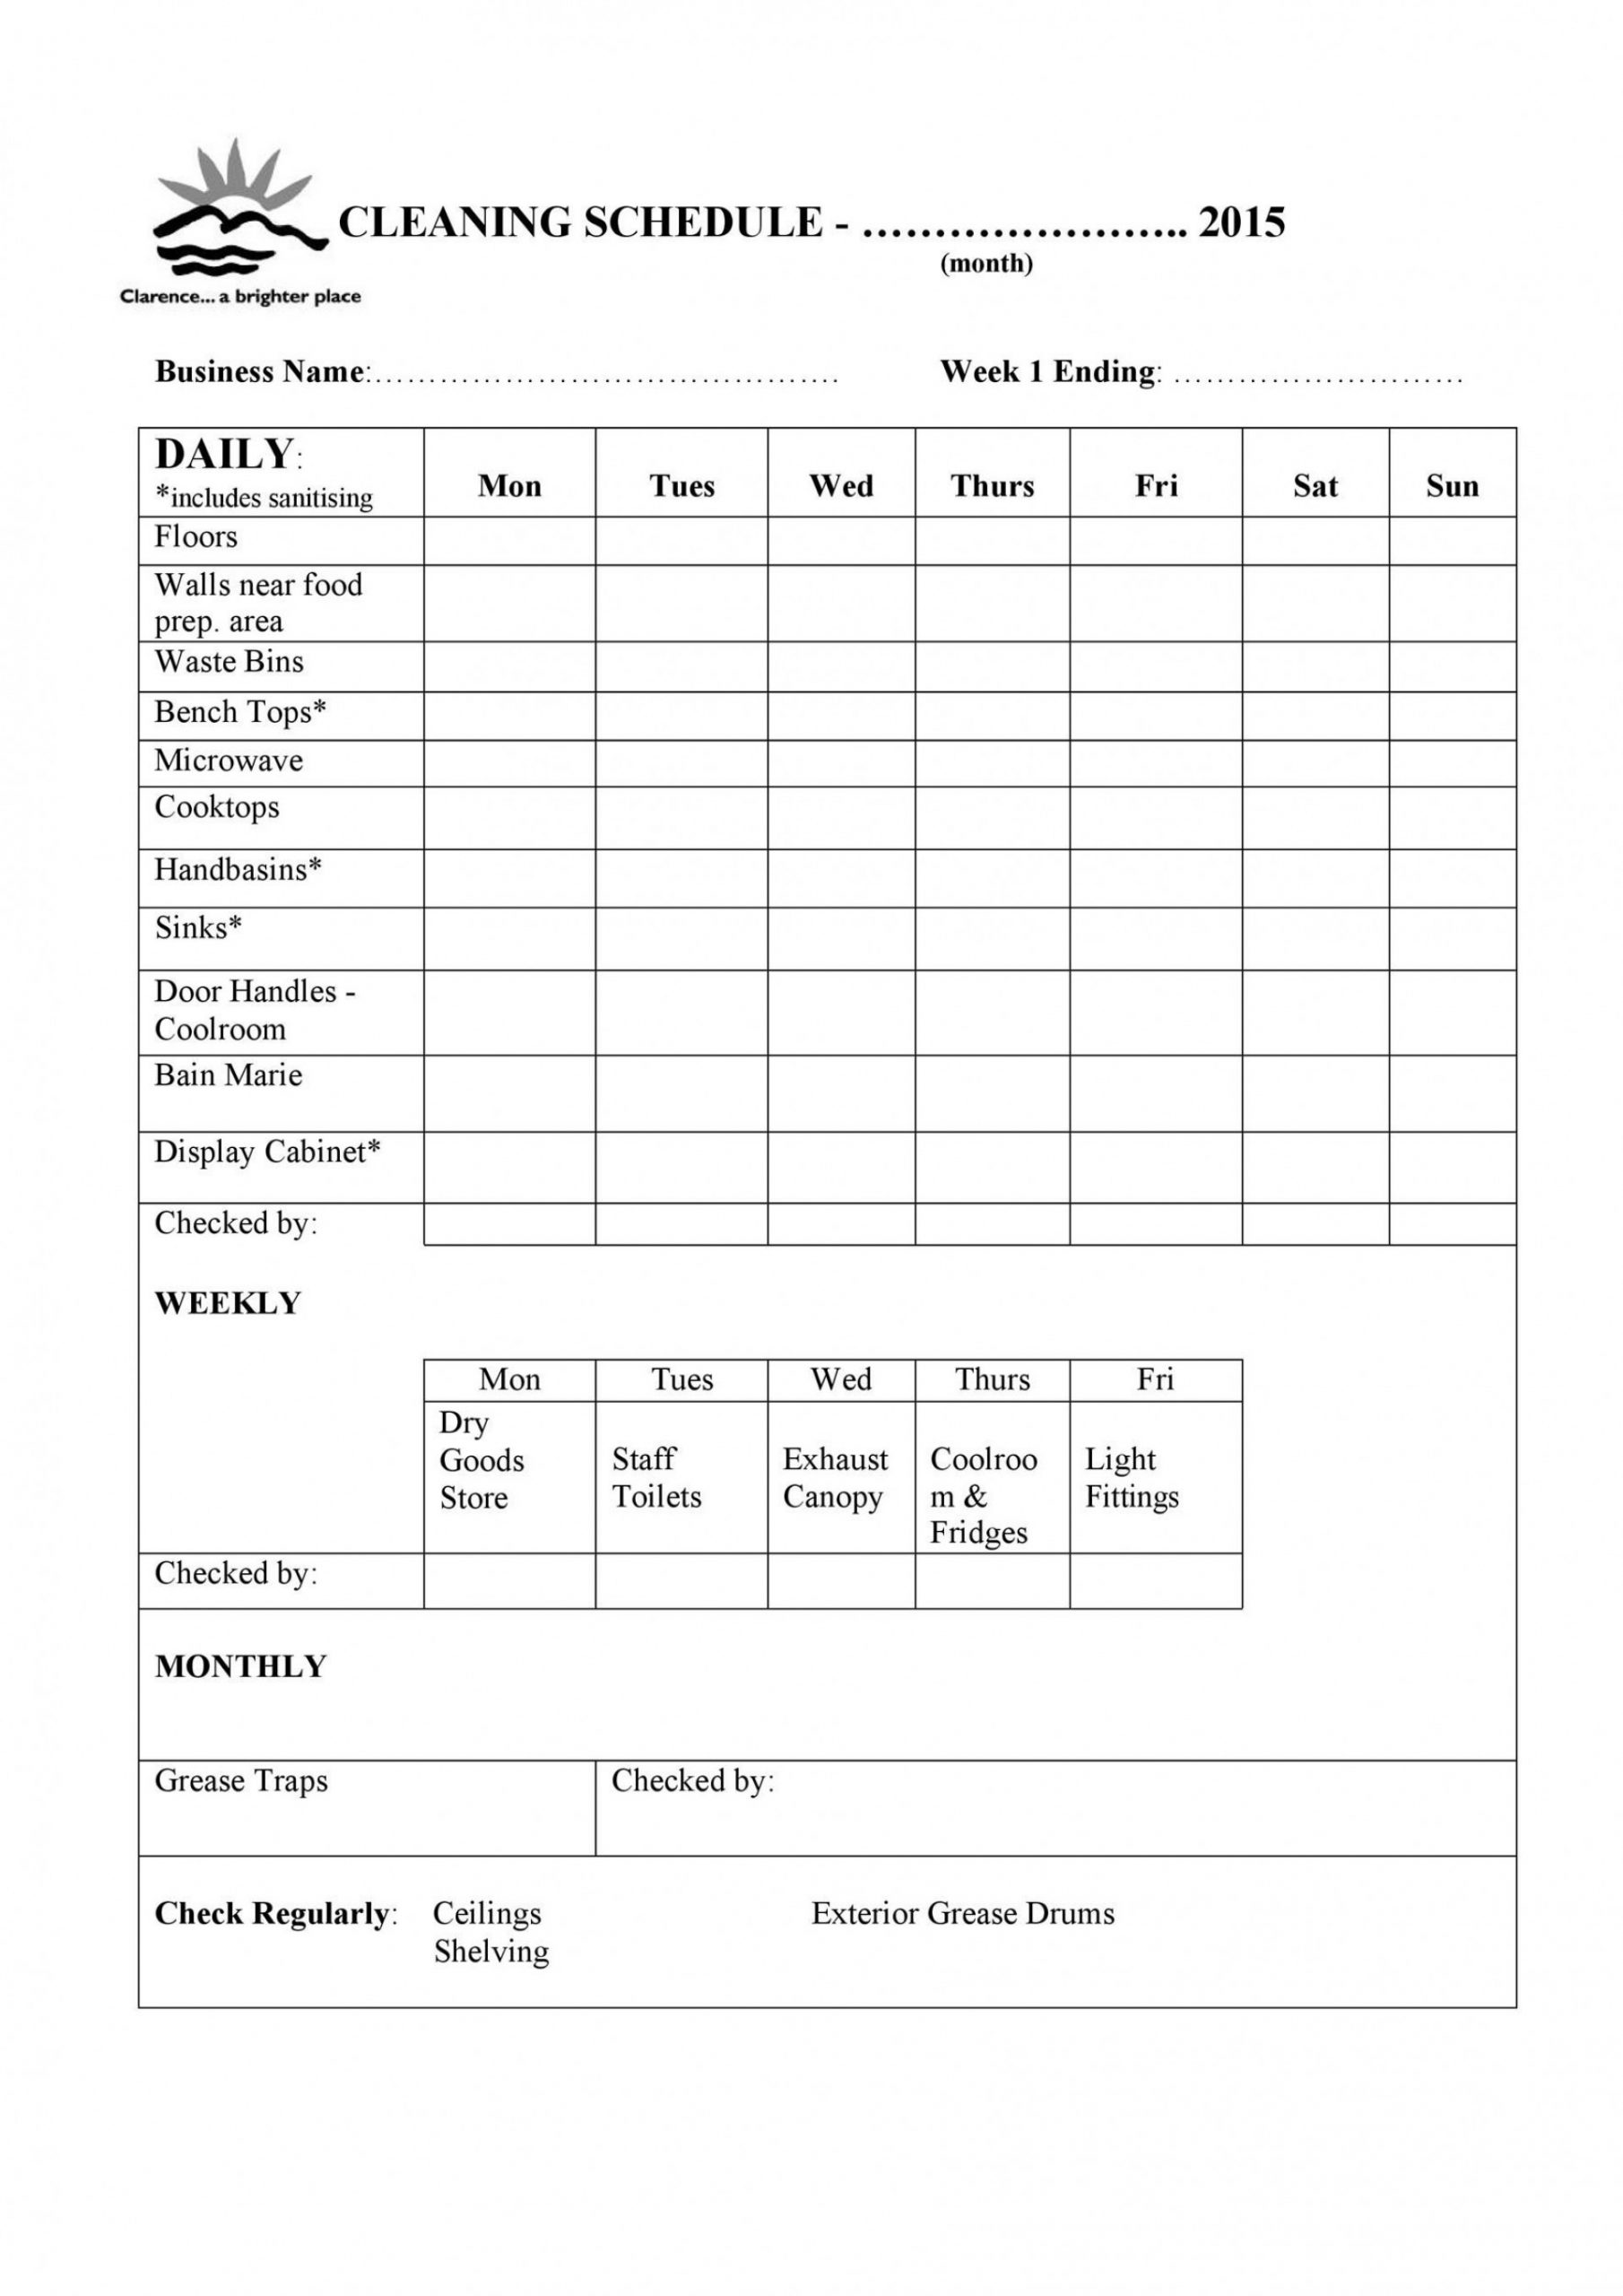 Weekly Cleaning Schedule Template Weekly Cleaning Schedule Template Addictionary